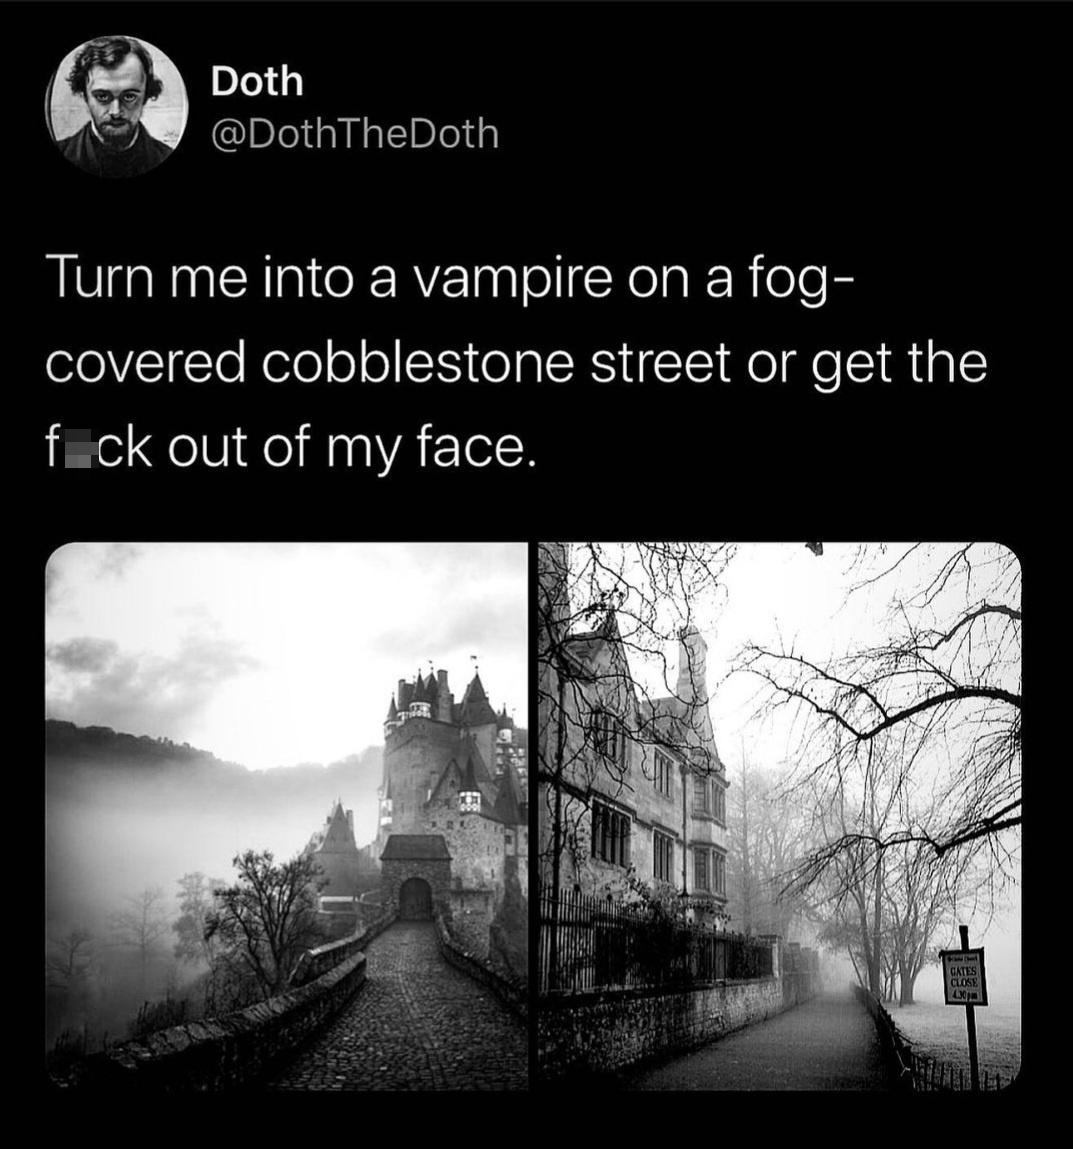 funny tweets and memes - monochrome photography - Doth Turn me into a vampire on a fog covered cobblestone street or get the fck out of my face. P Gates Close 4.30pm